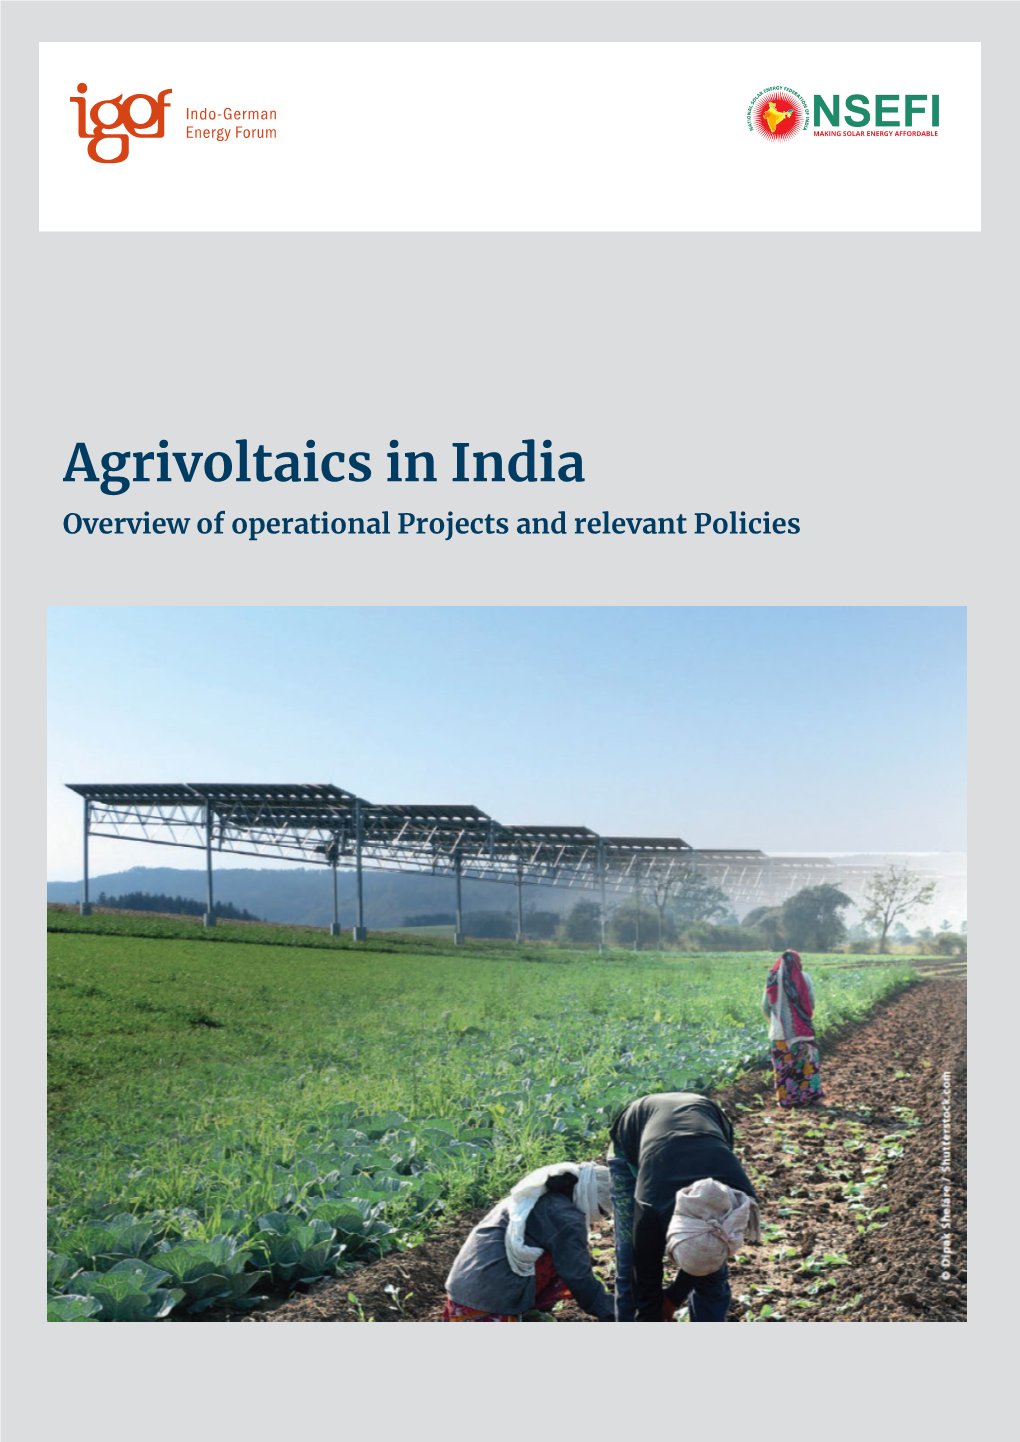 Overview on Agrivoltaic Projects in India